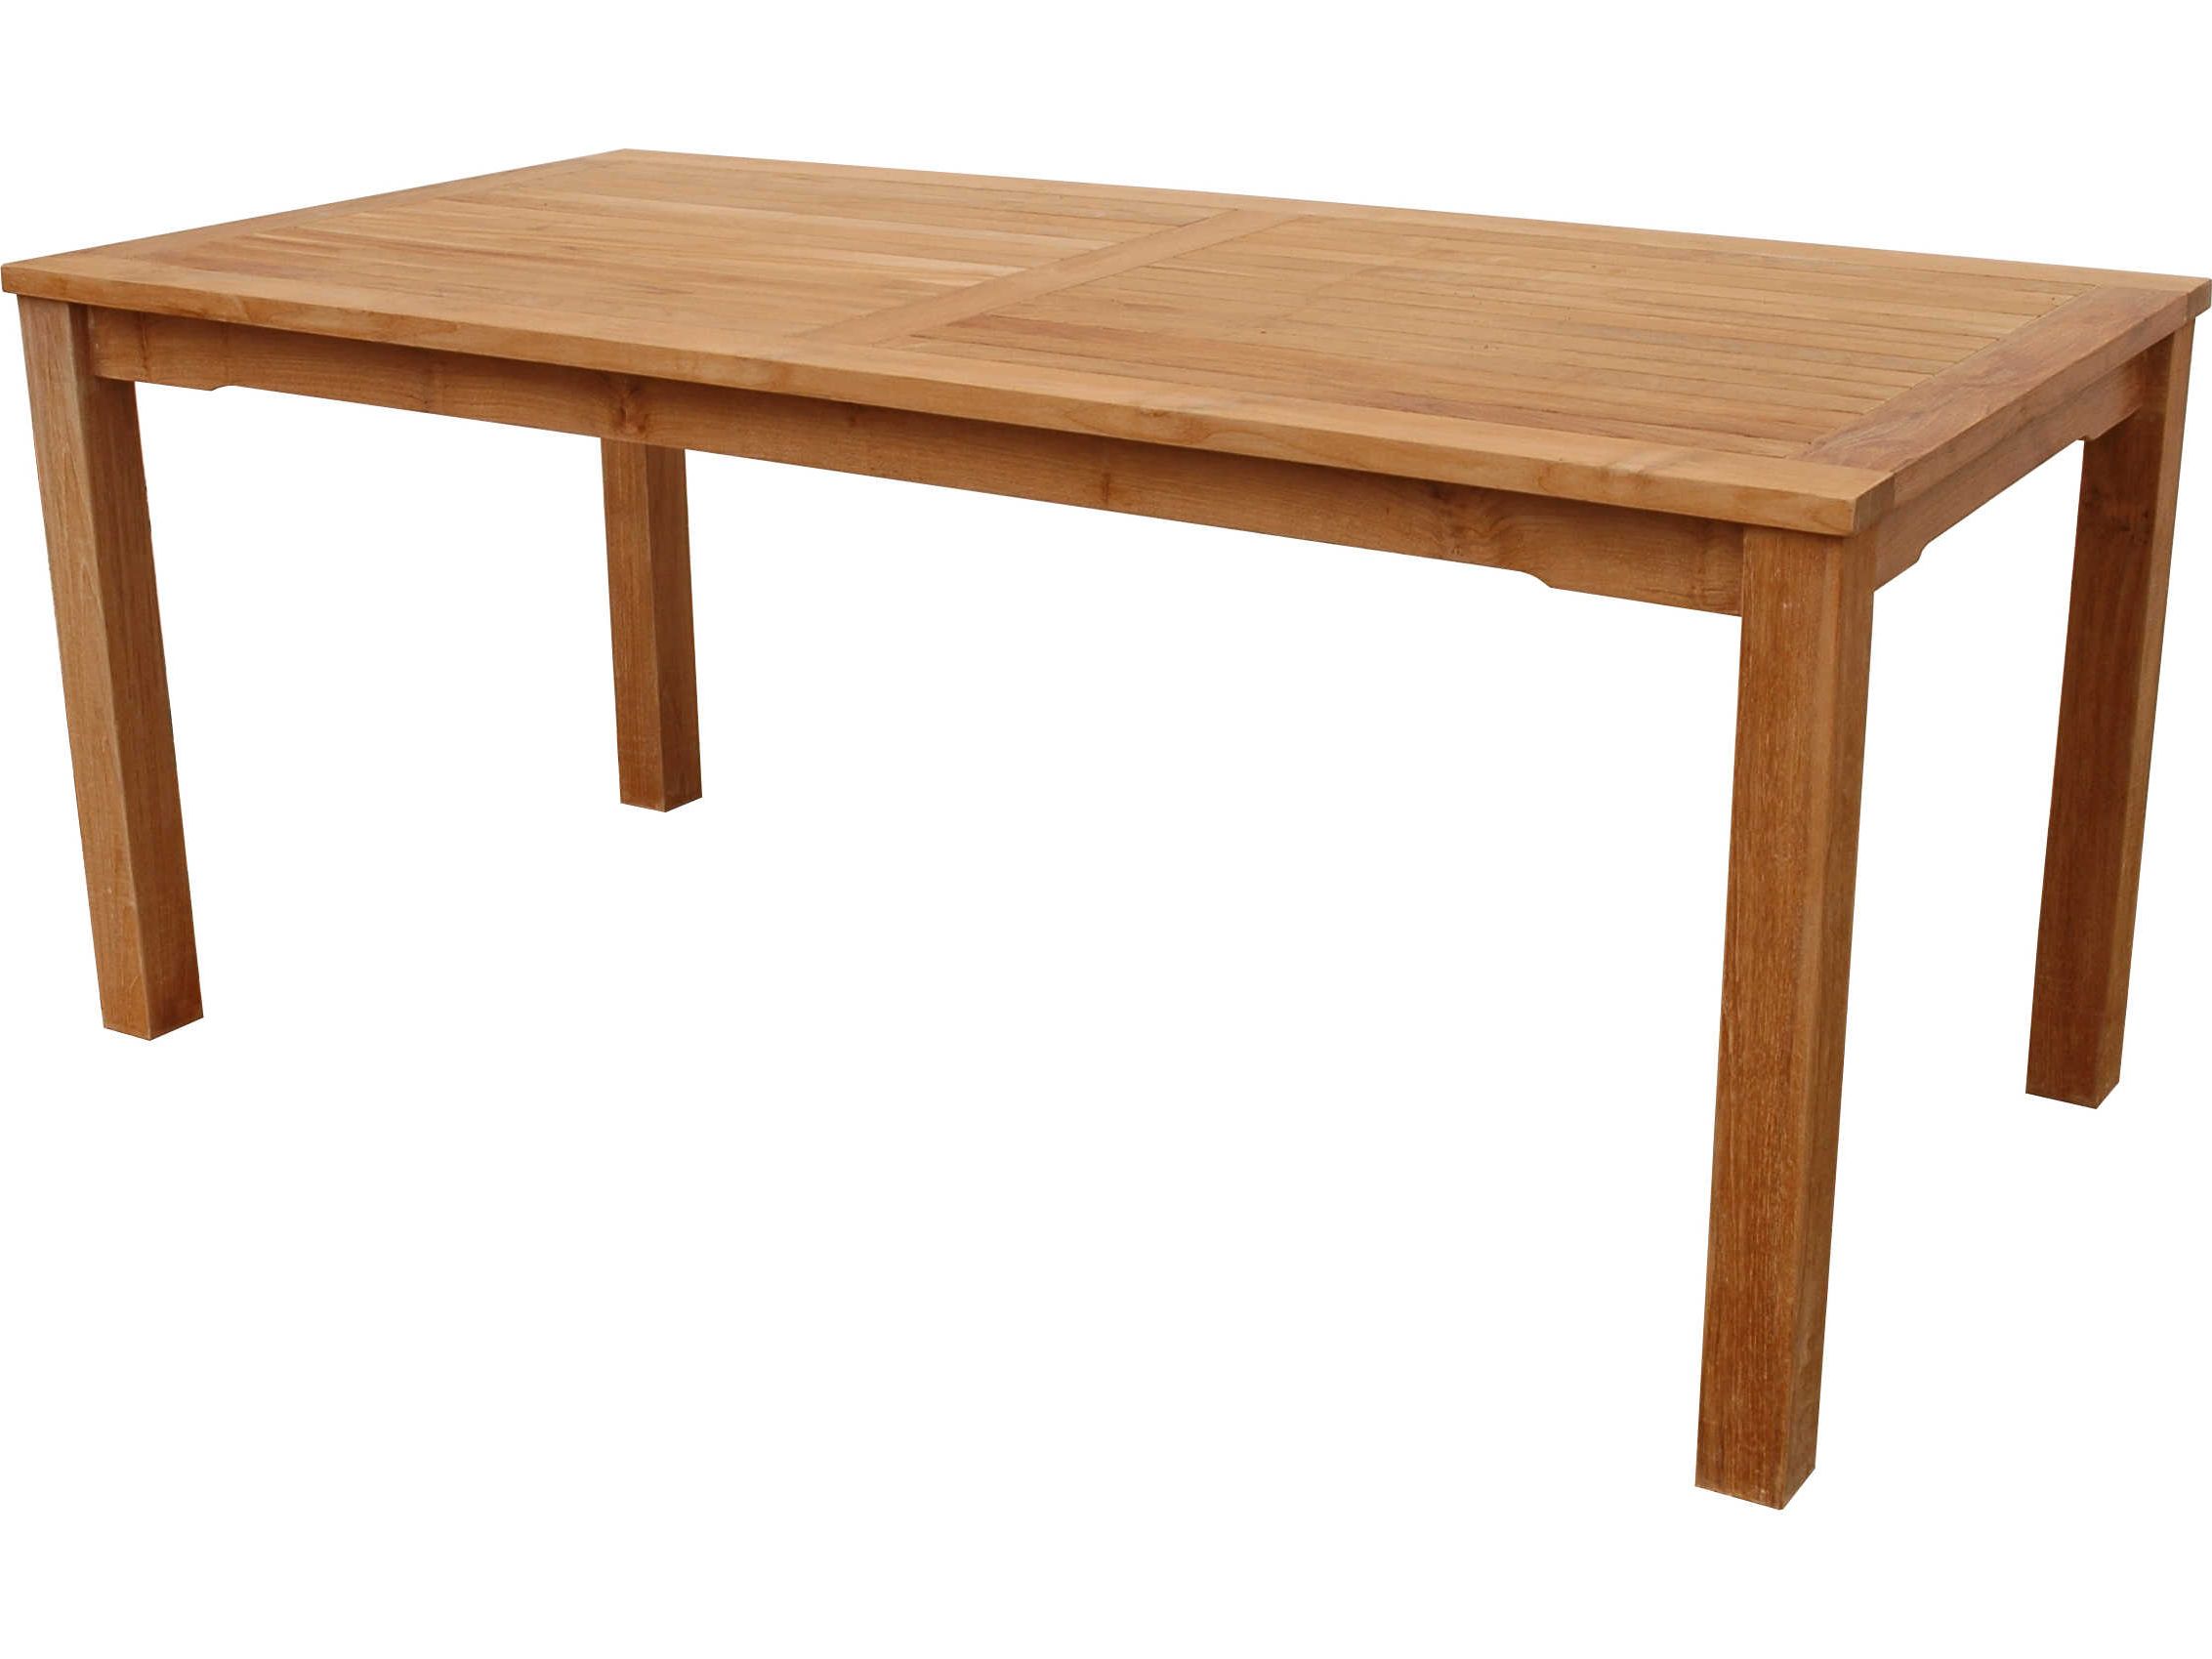 Anderson Teak Bahama 70 X 35 Rectangular Dining Table (View 2 of 20)